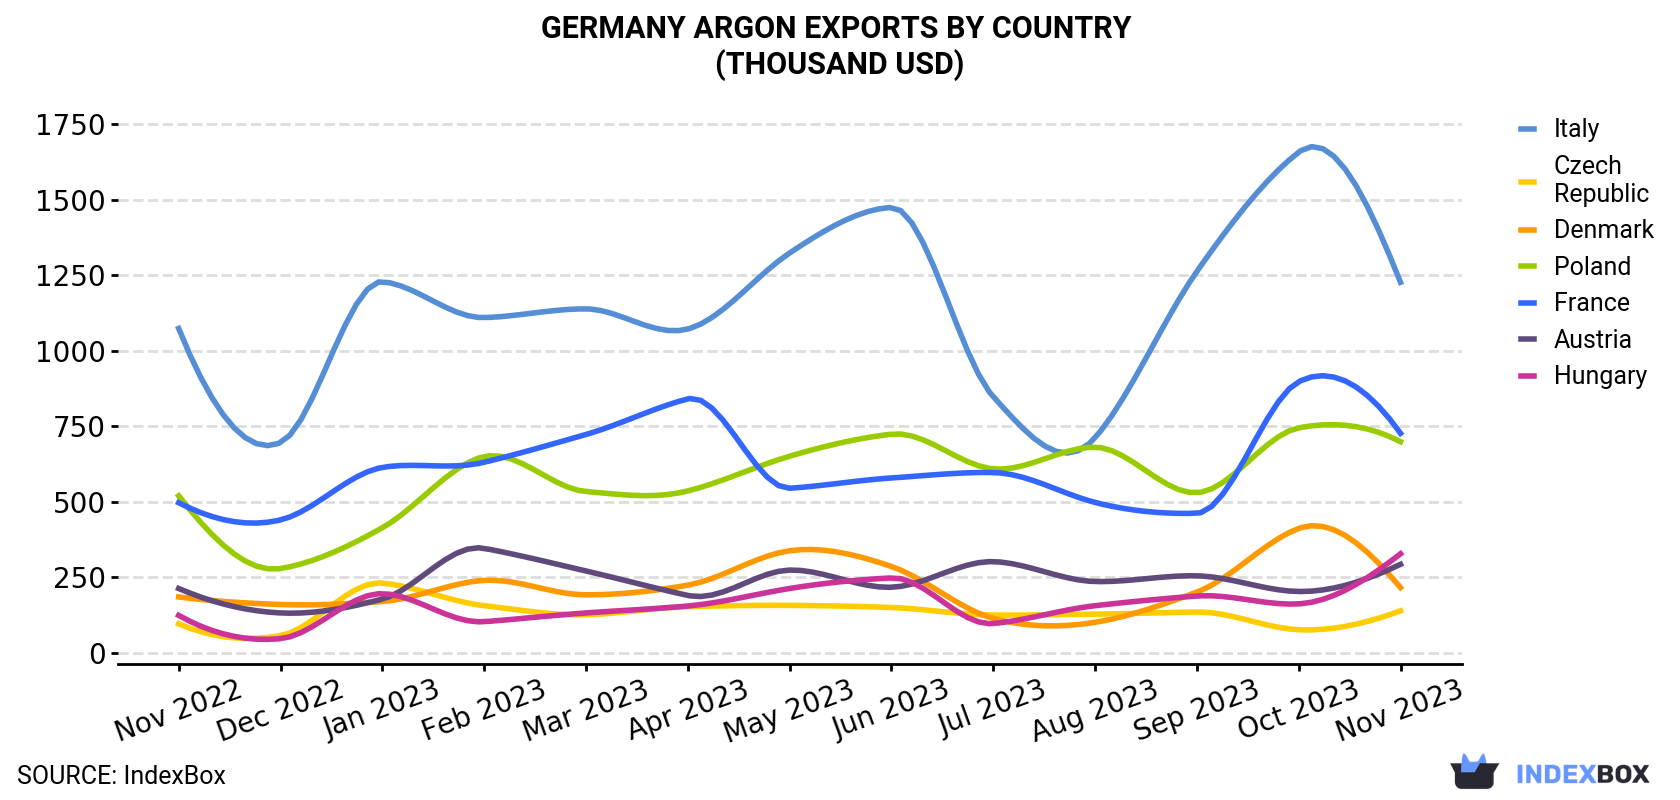 Germany Argon Exports By Country (Thousand USD)